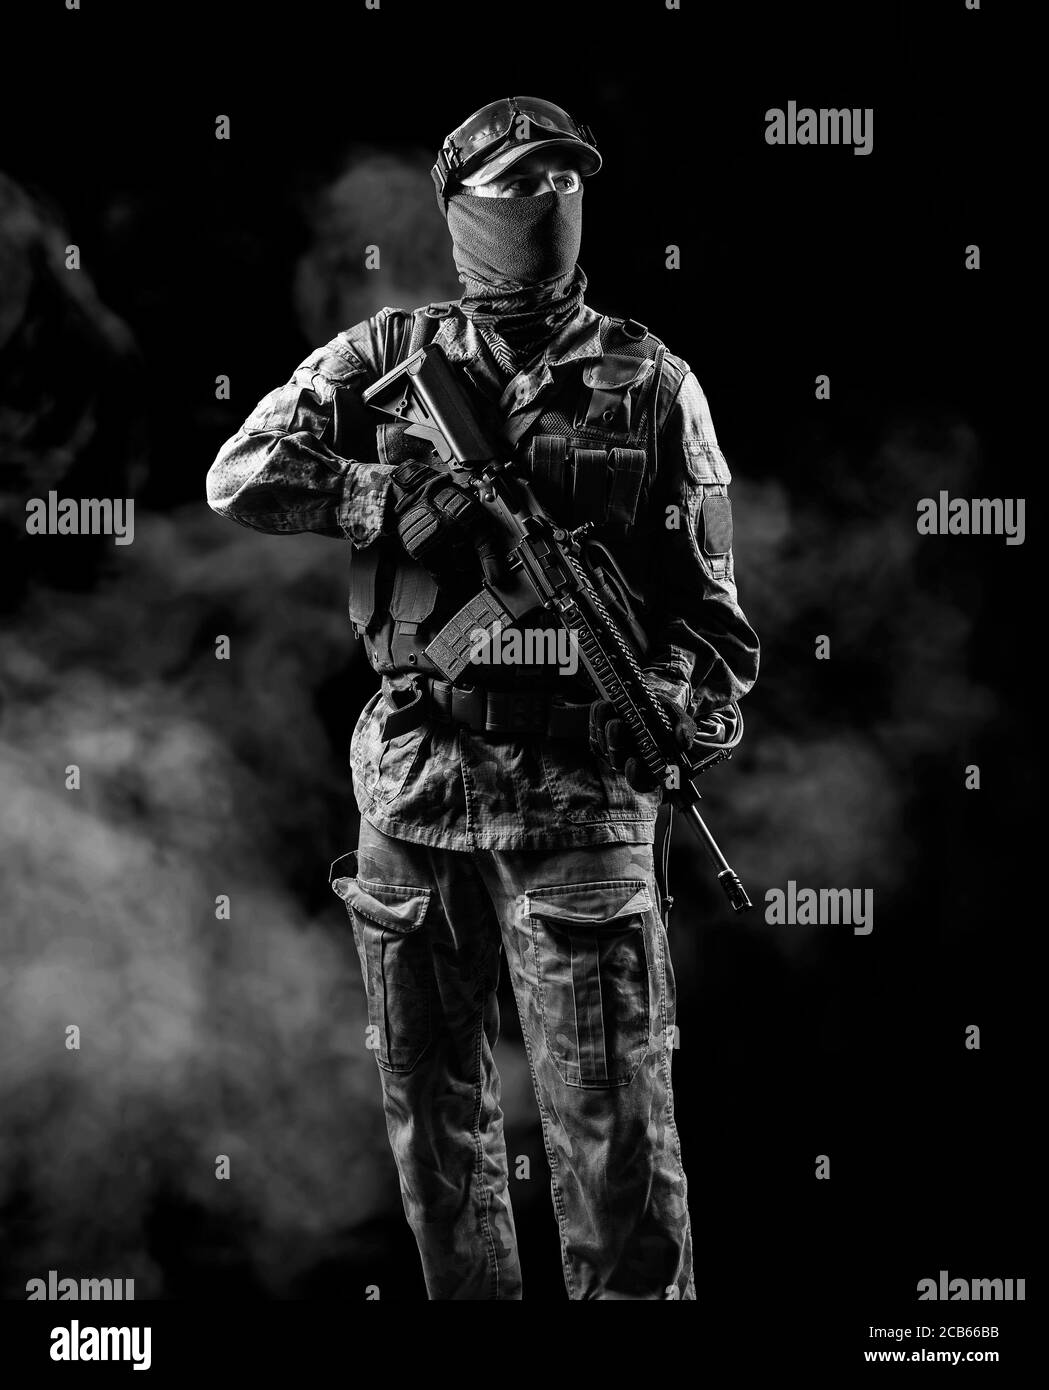 Indian Army Commando Hd Image Download - Colaboratory